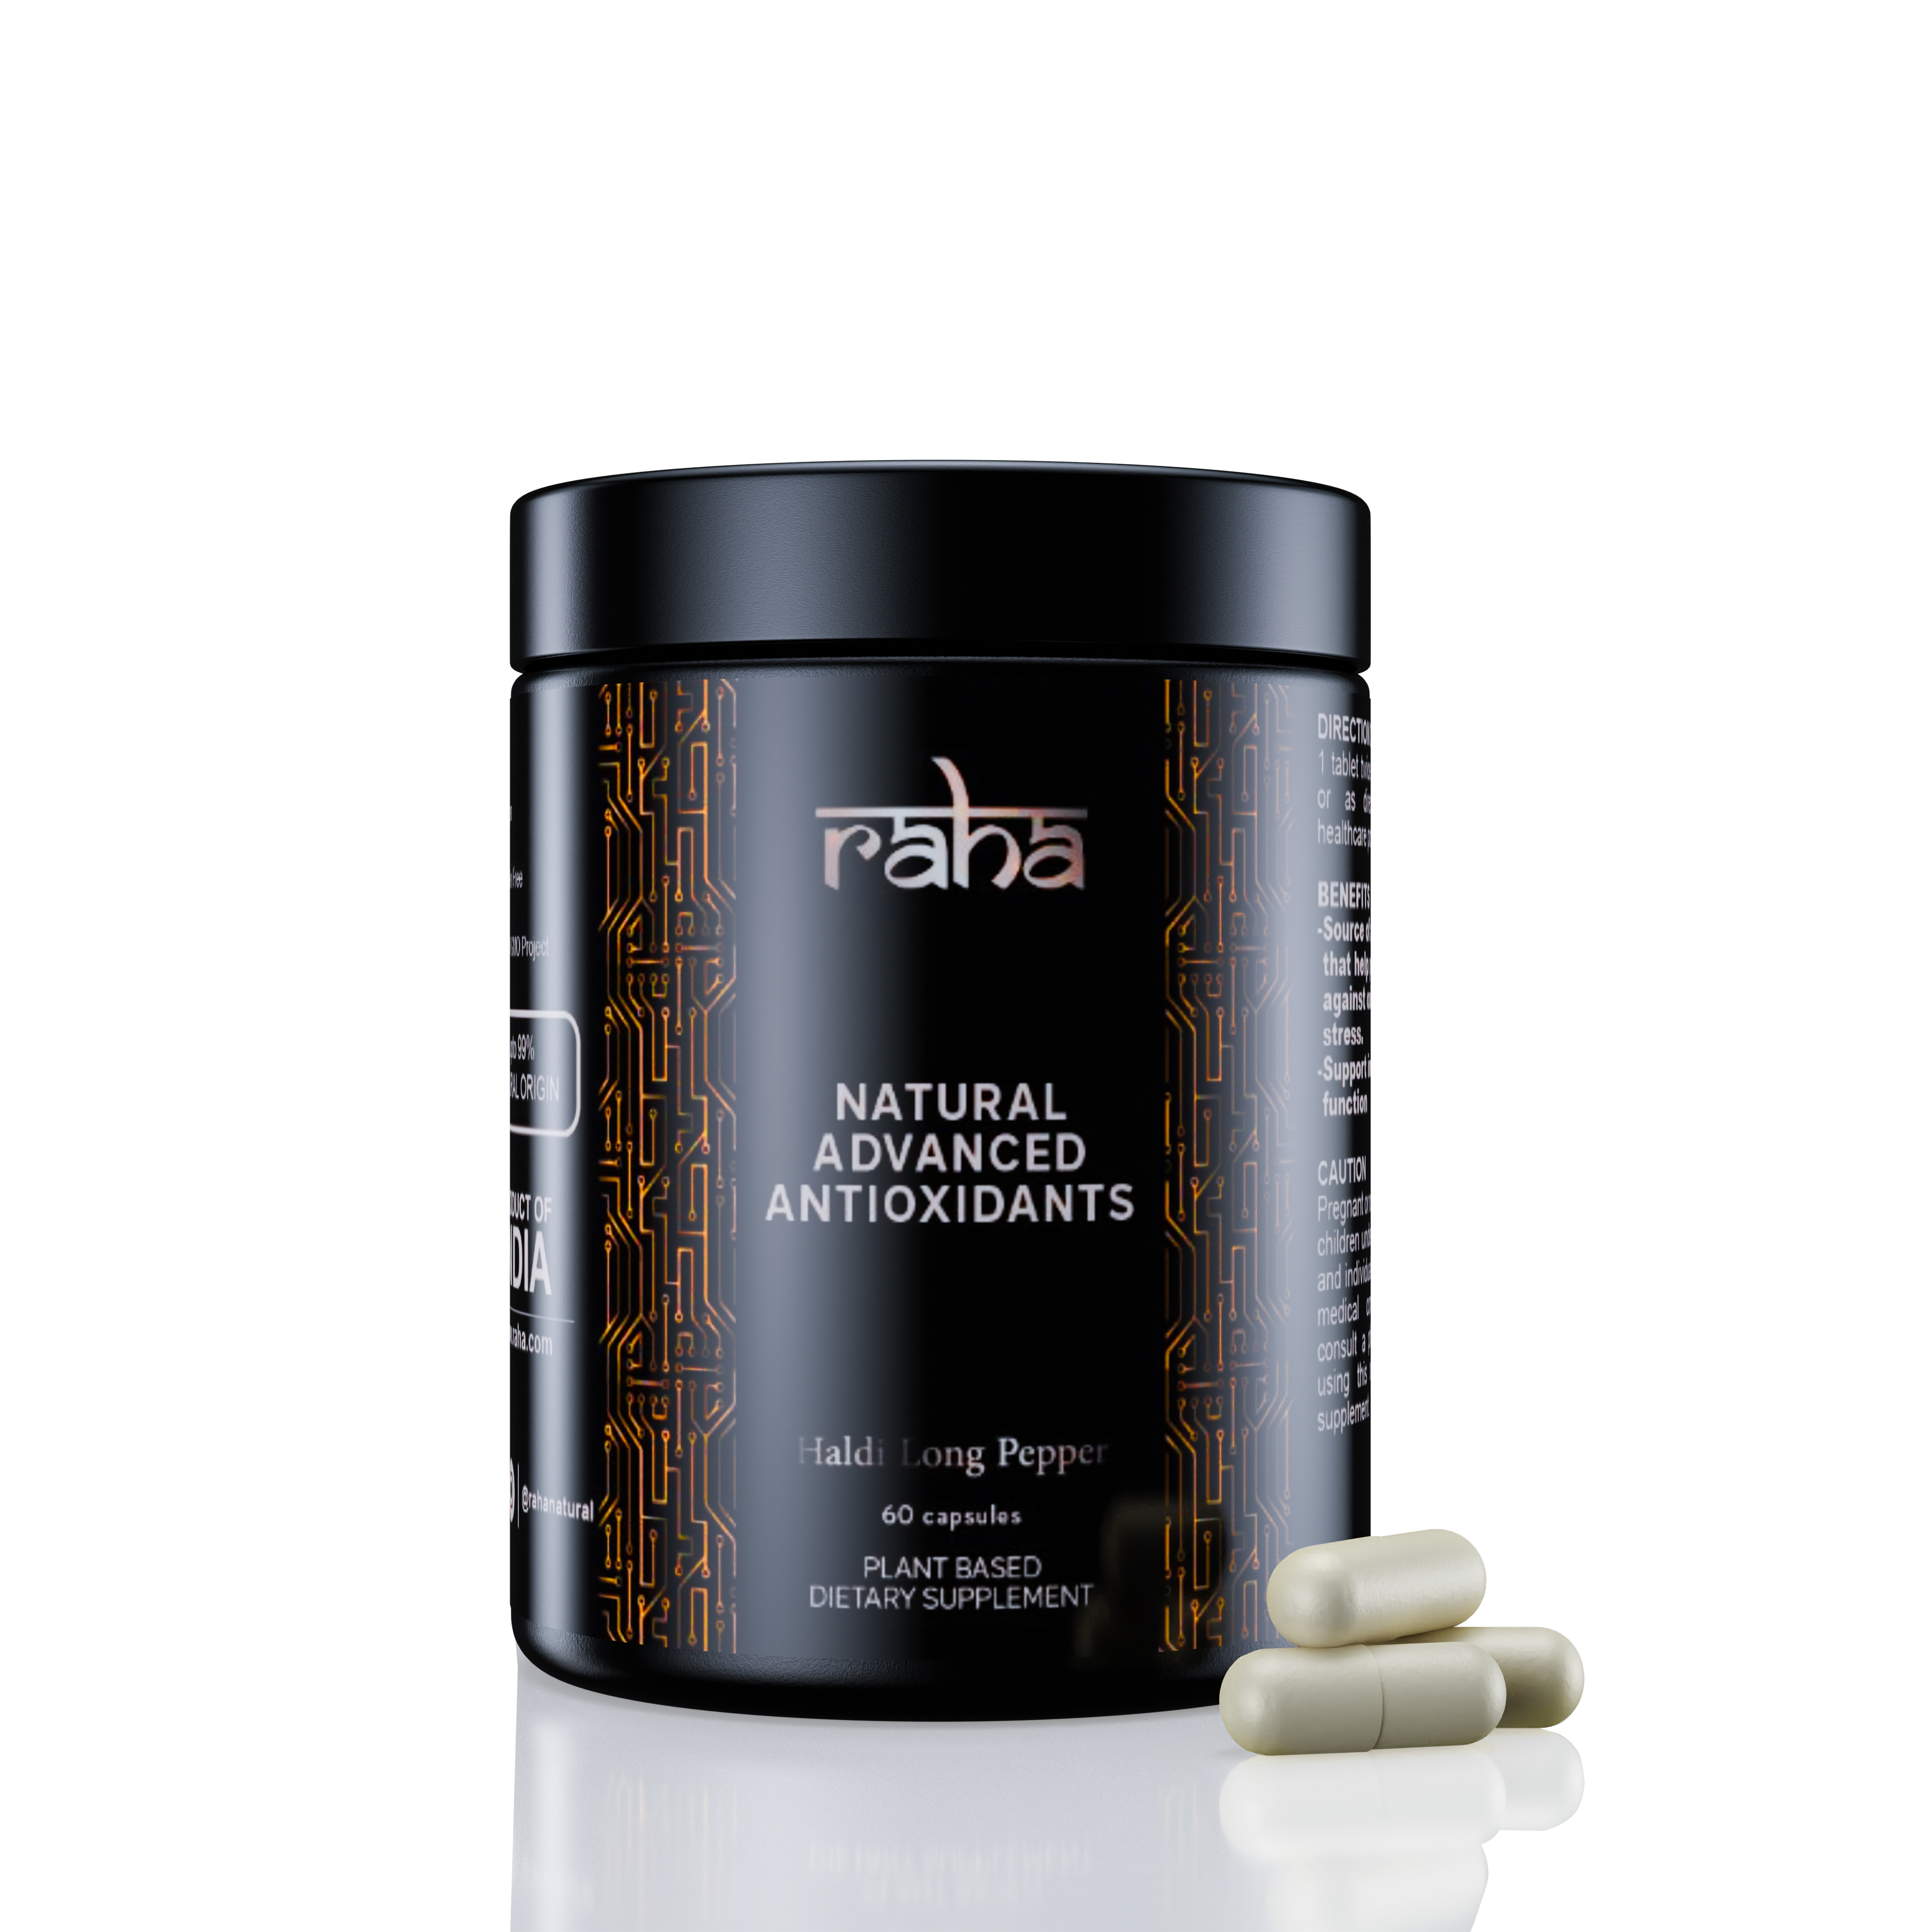 Raha natural advanced antioxidants for improving aging and metabolic disorders